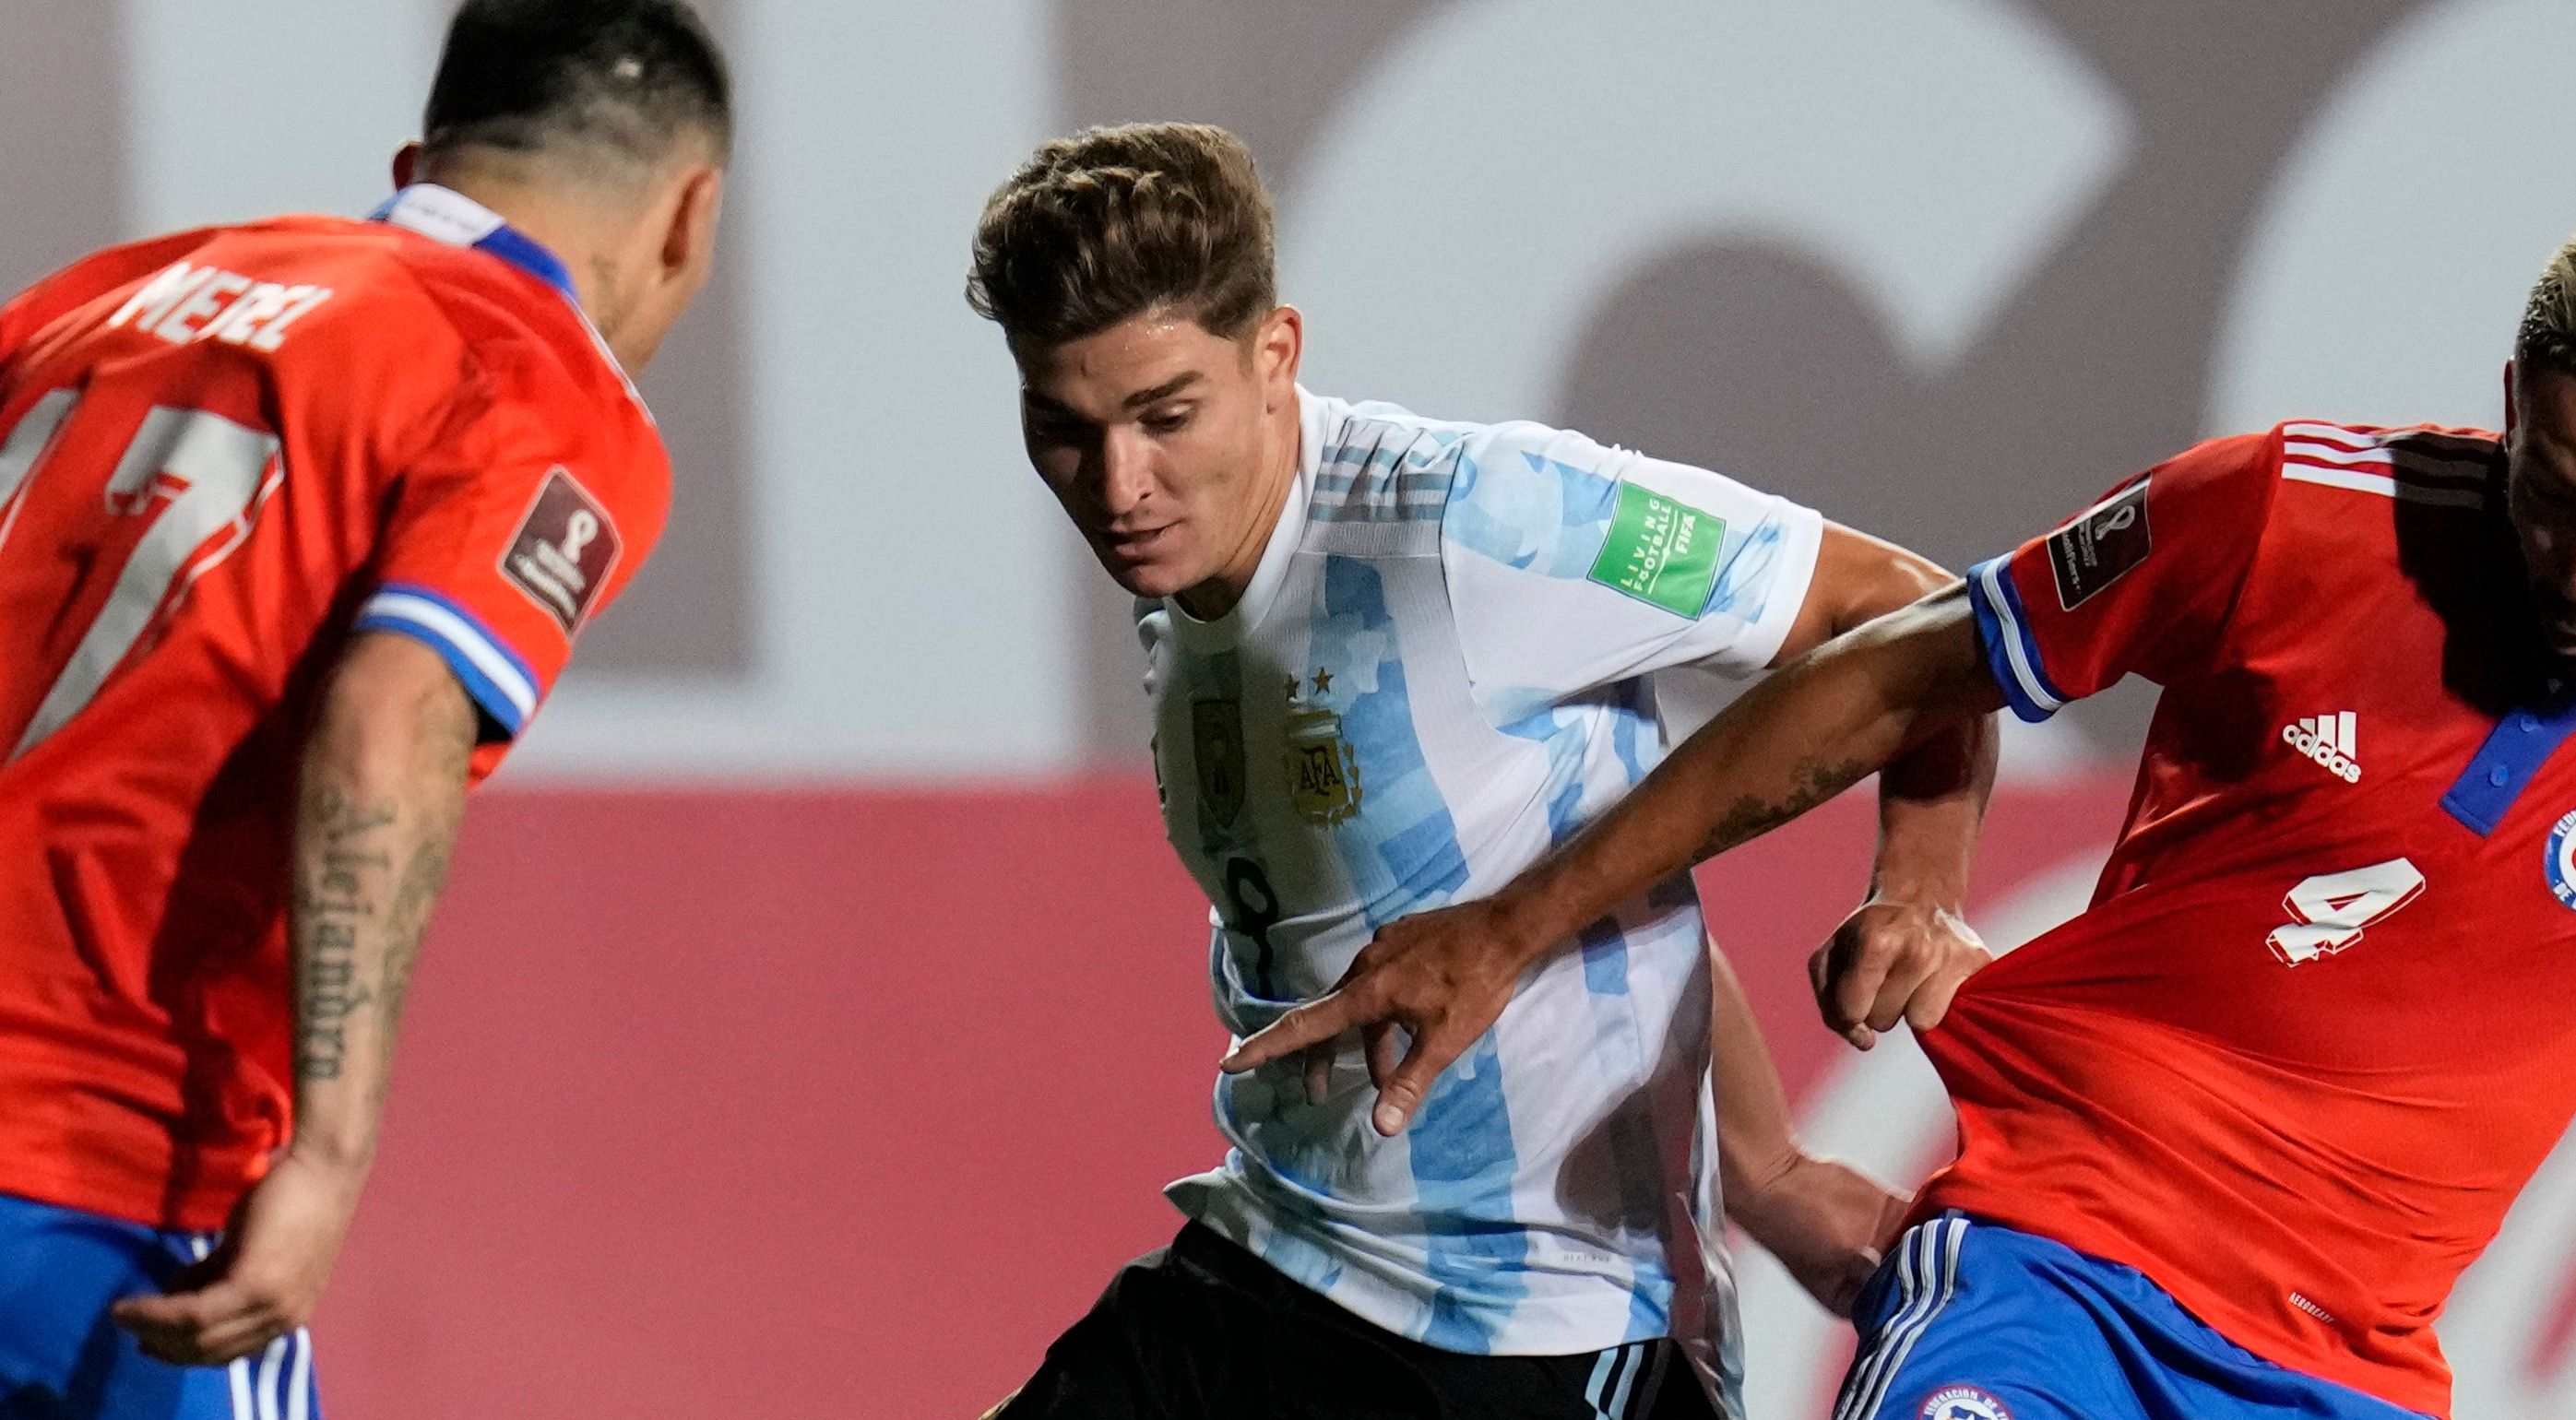 Julian Alvarez is going to Manchester City as the River Plate